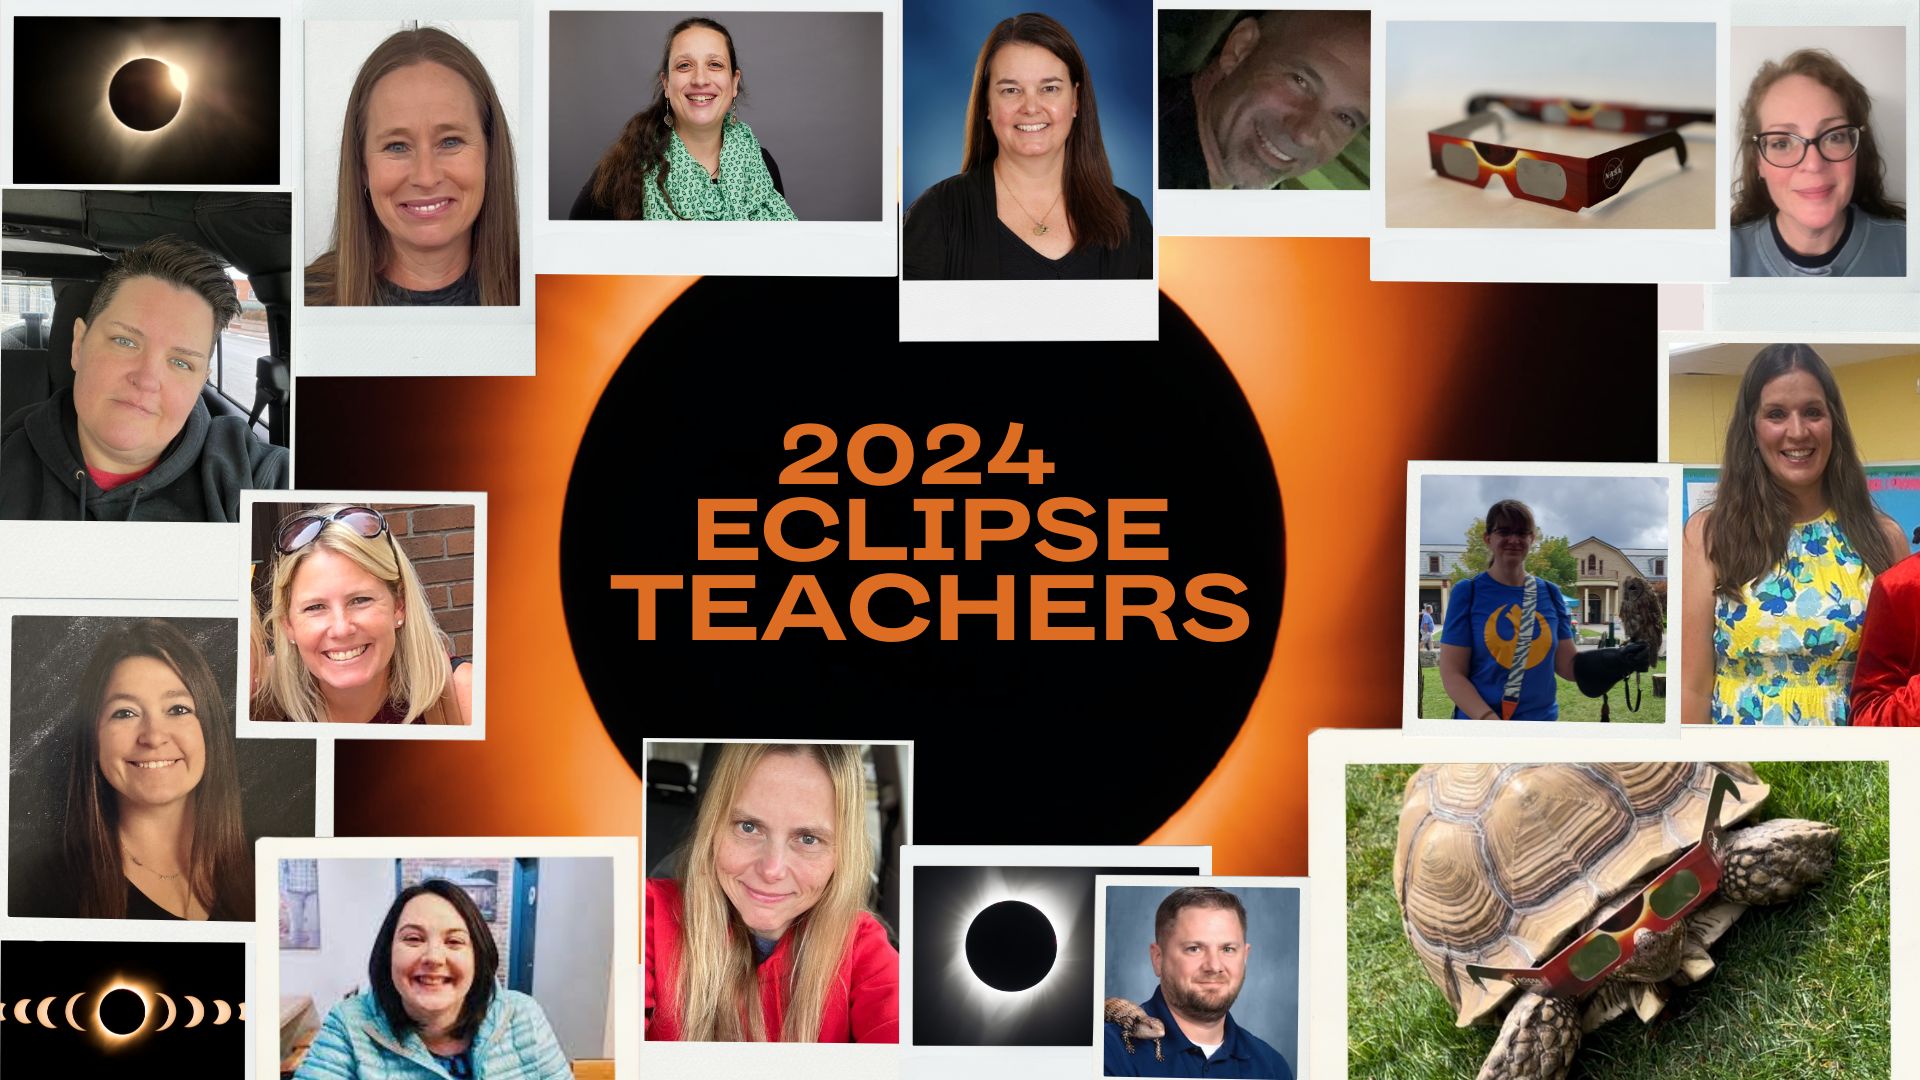 Collage showing 14 of the 19 educators selected and one tortoise observer with eclipse glasses.